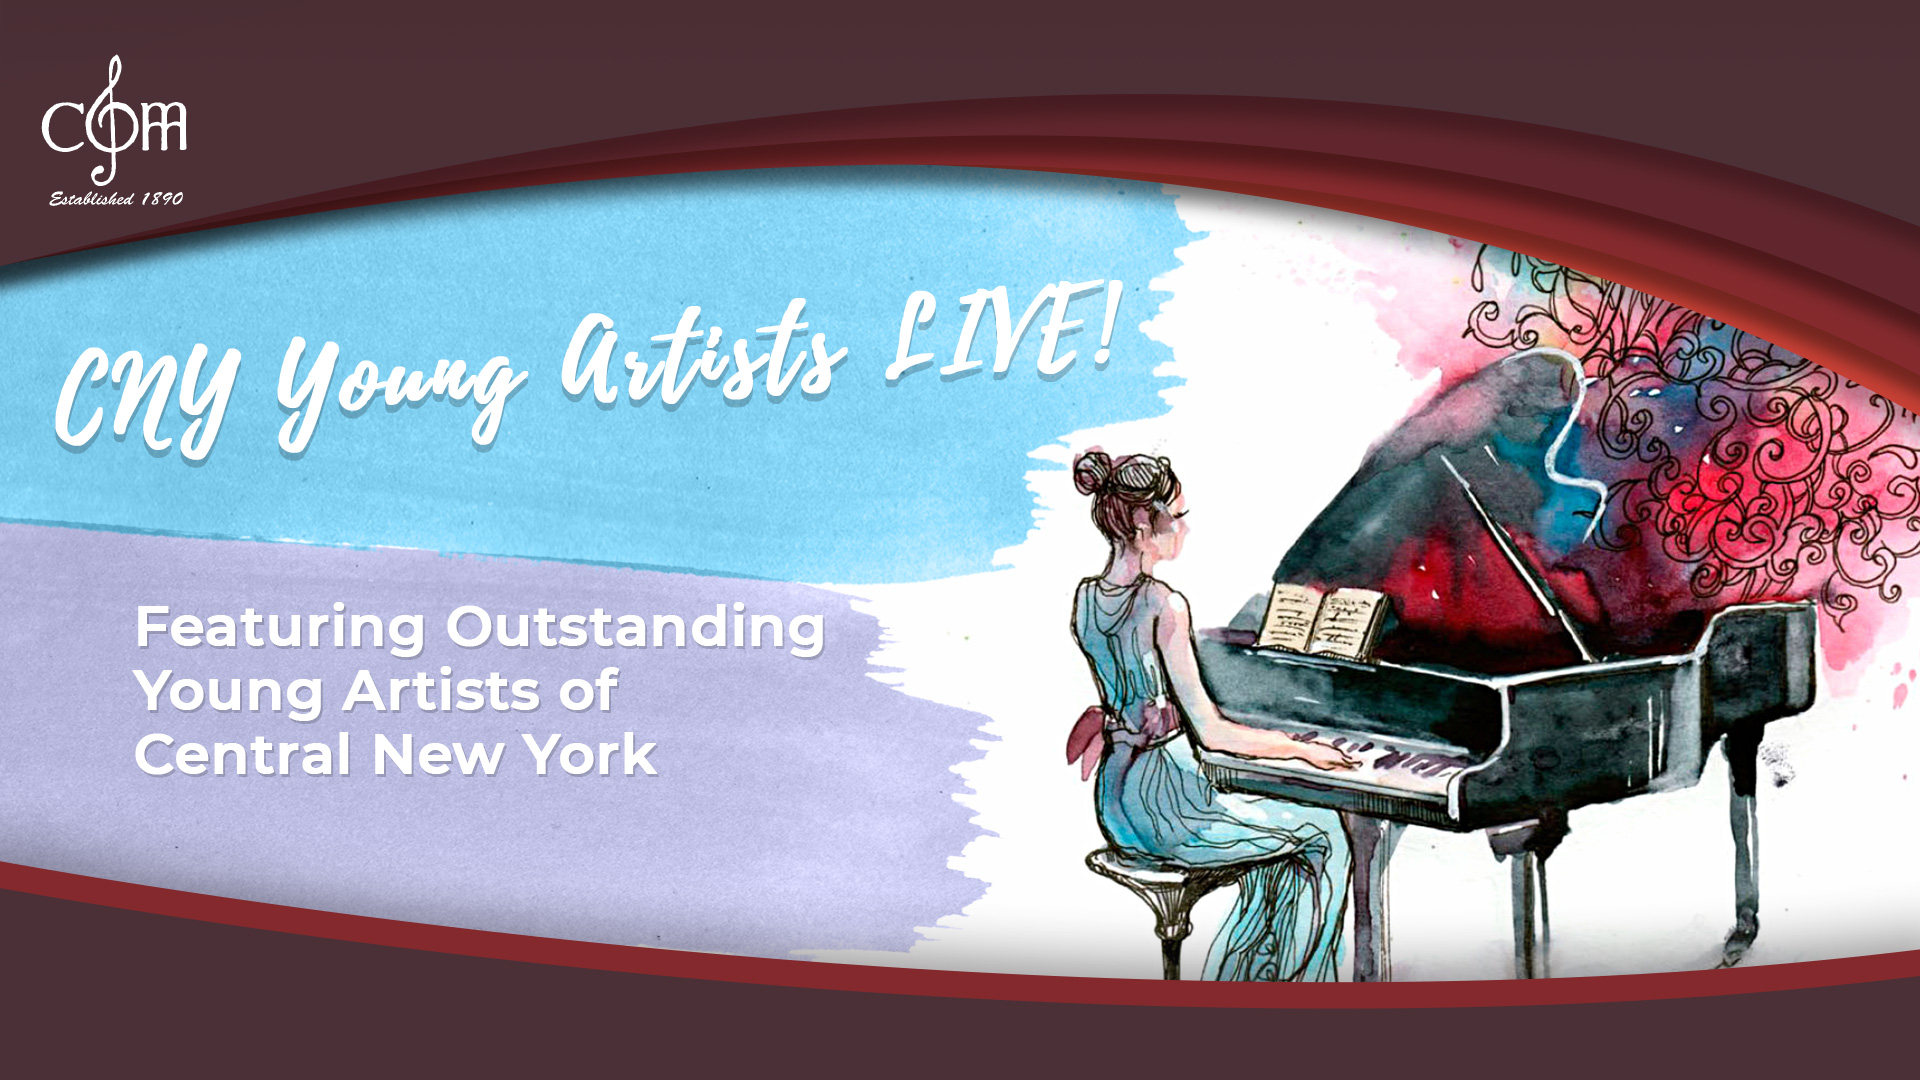 CNY Young Artists Live!